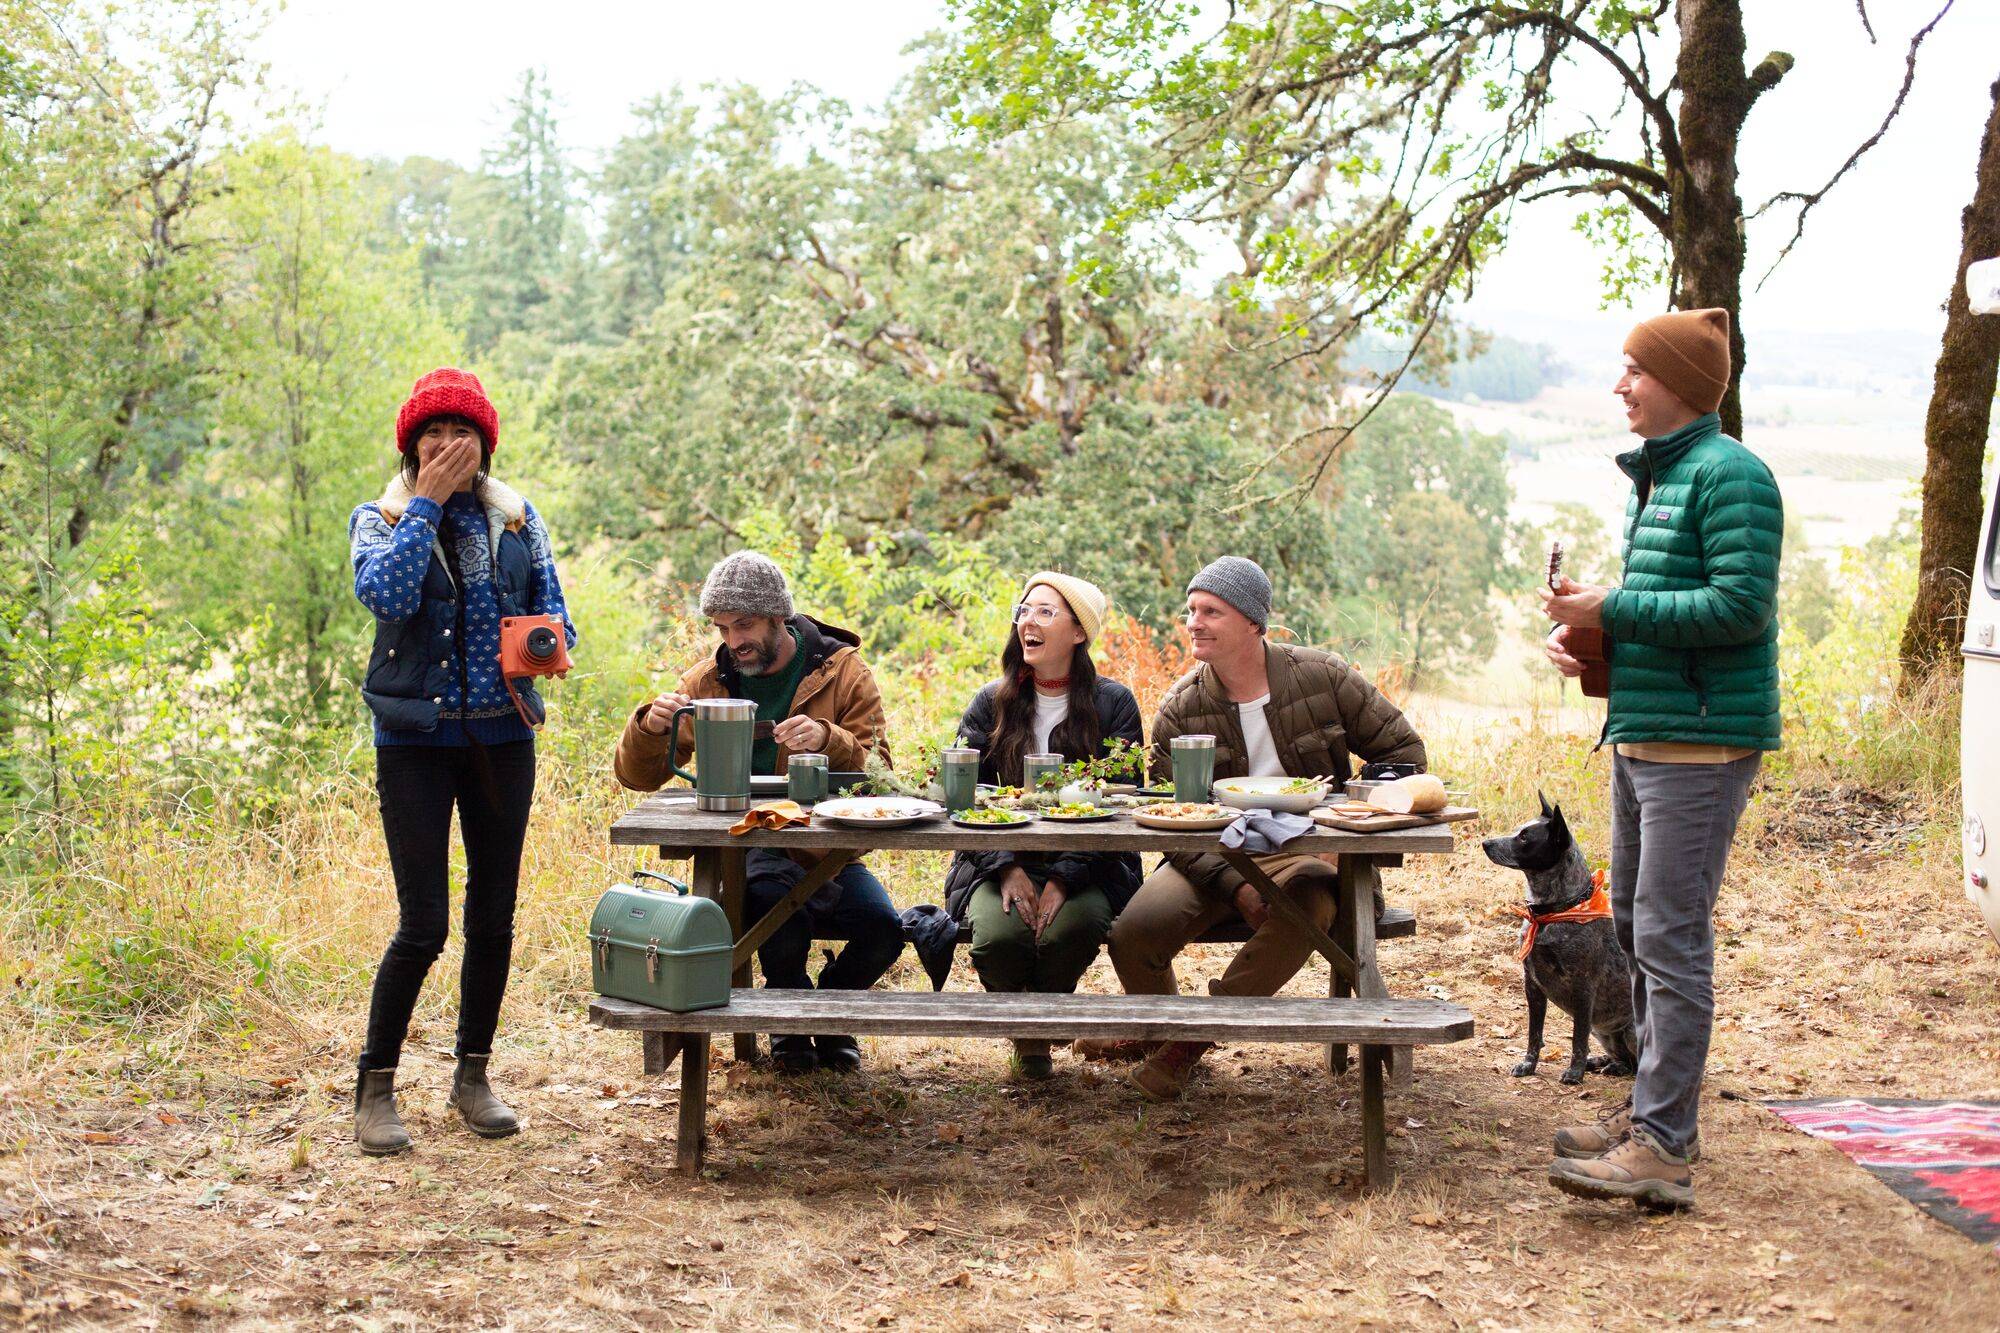 12 Tips for Responsible Group Camping Trips